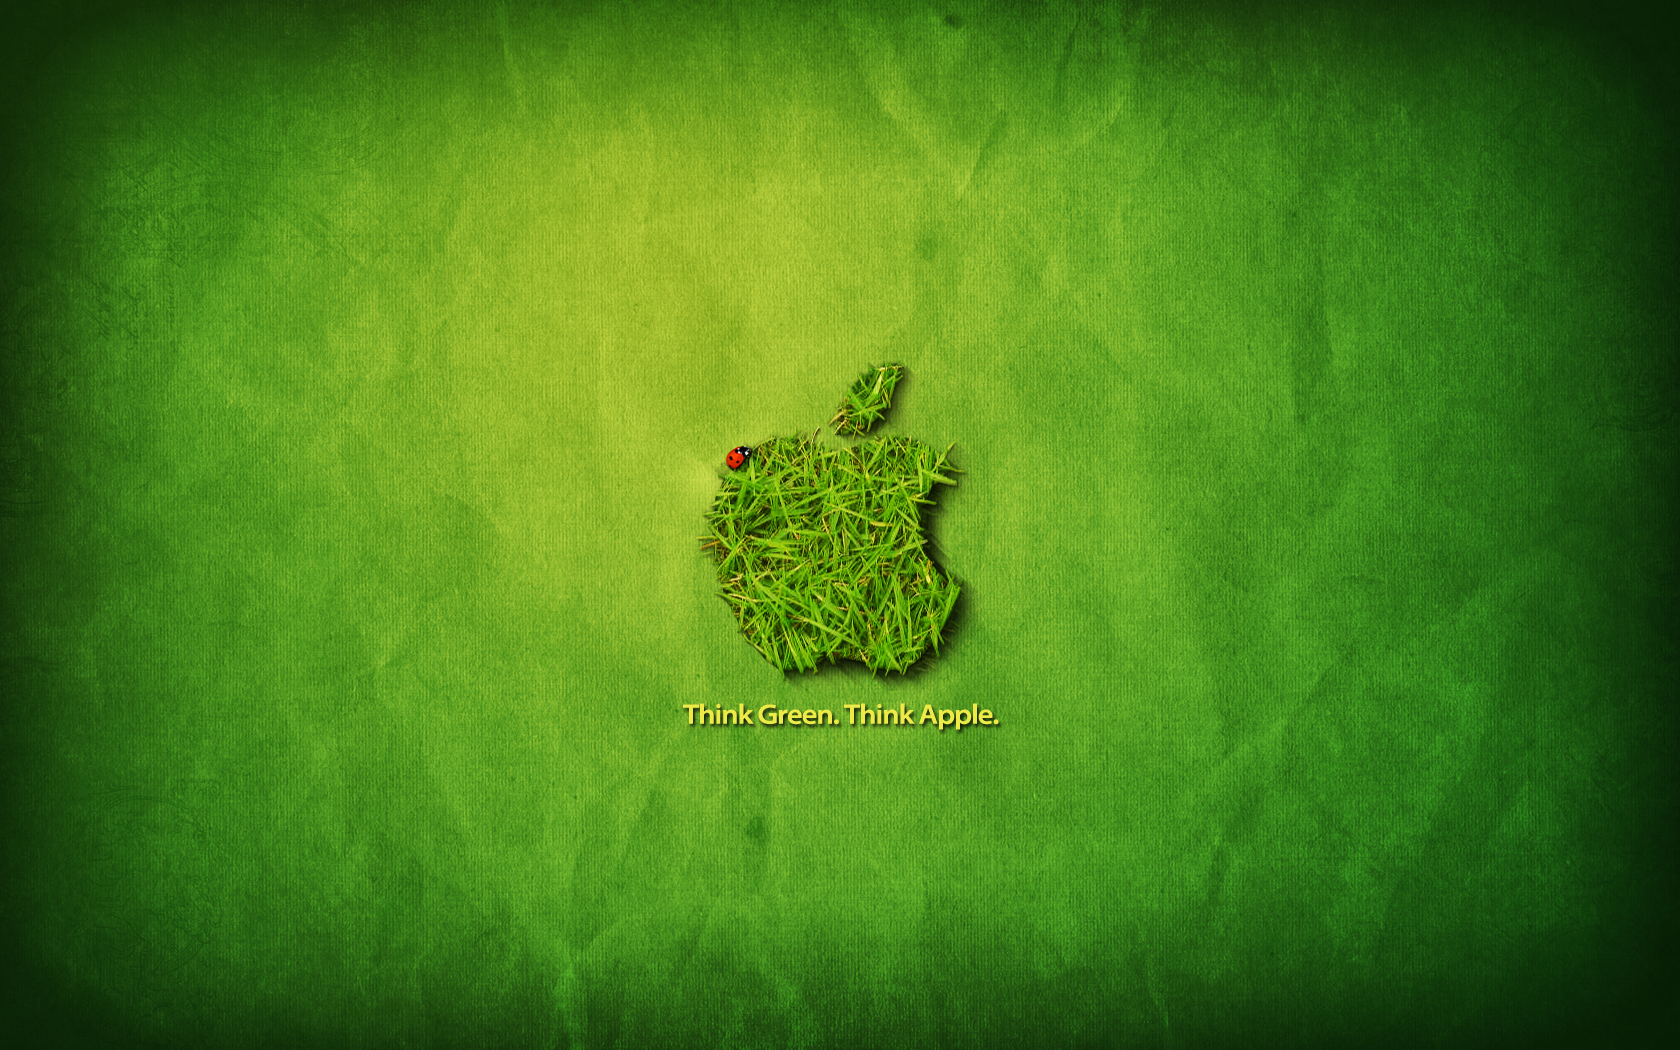 Green Images Apple Think Green Background Hd Desktop - Apple Green Wallpaper Hd , HD Wallpaper & Backgrounds